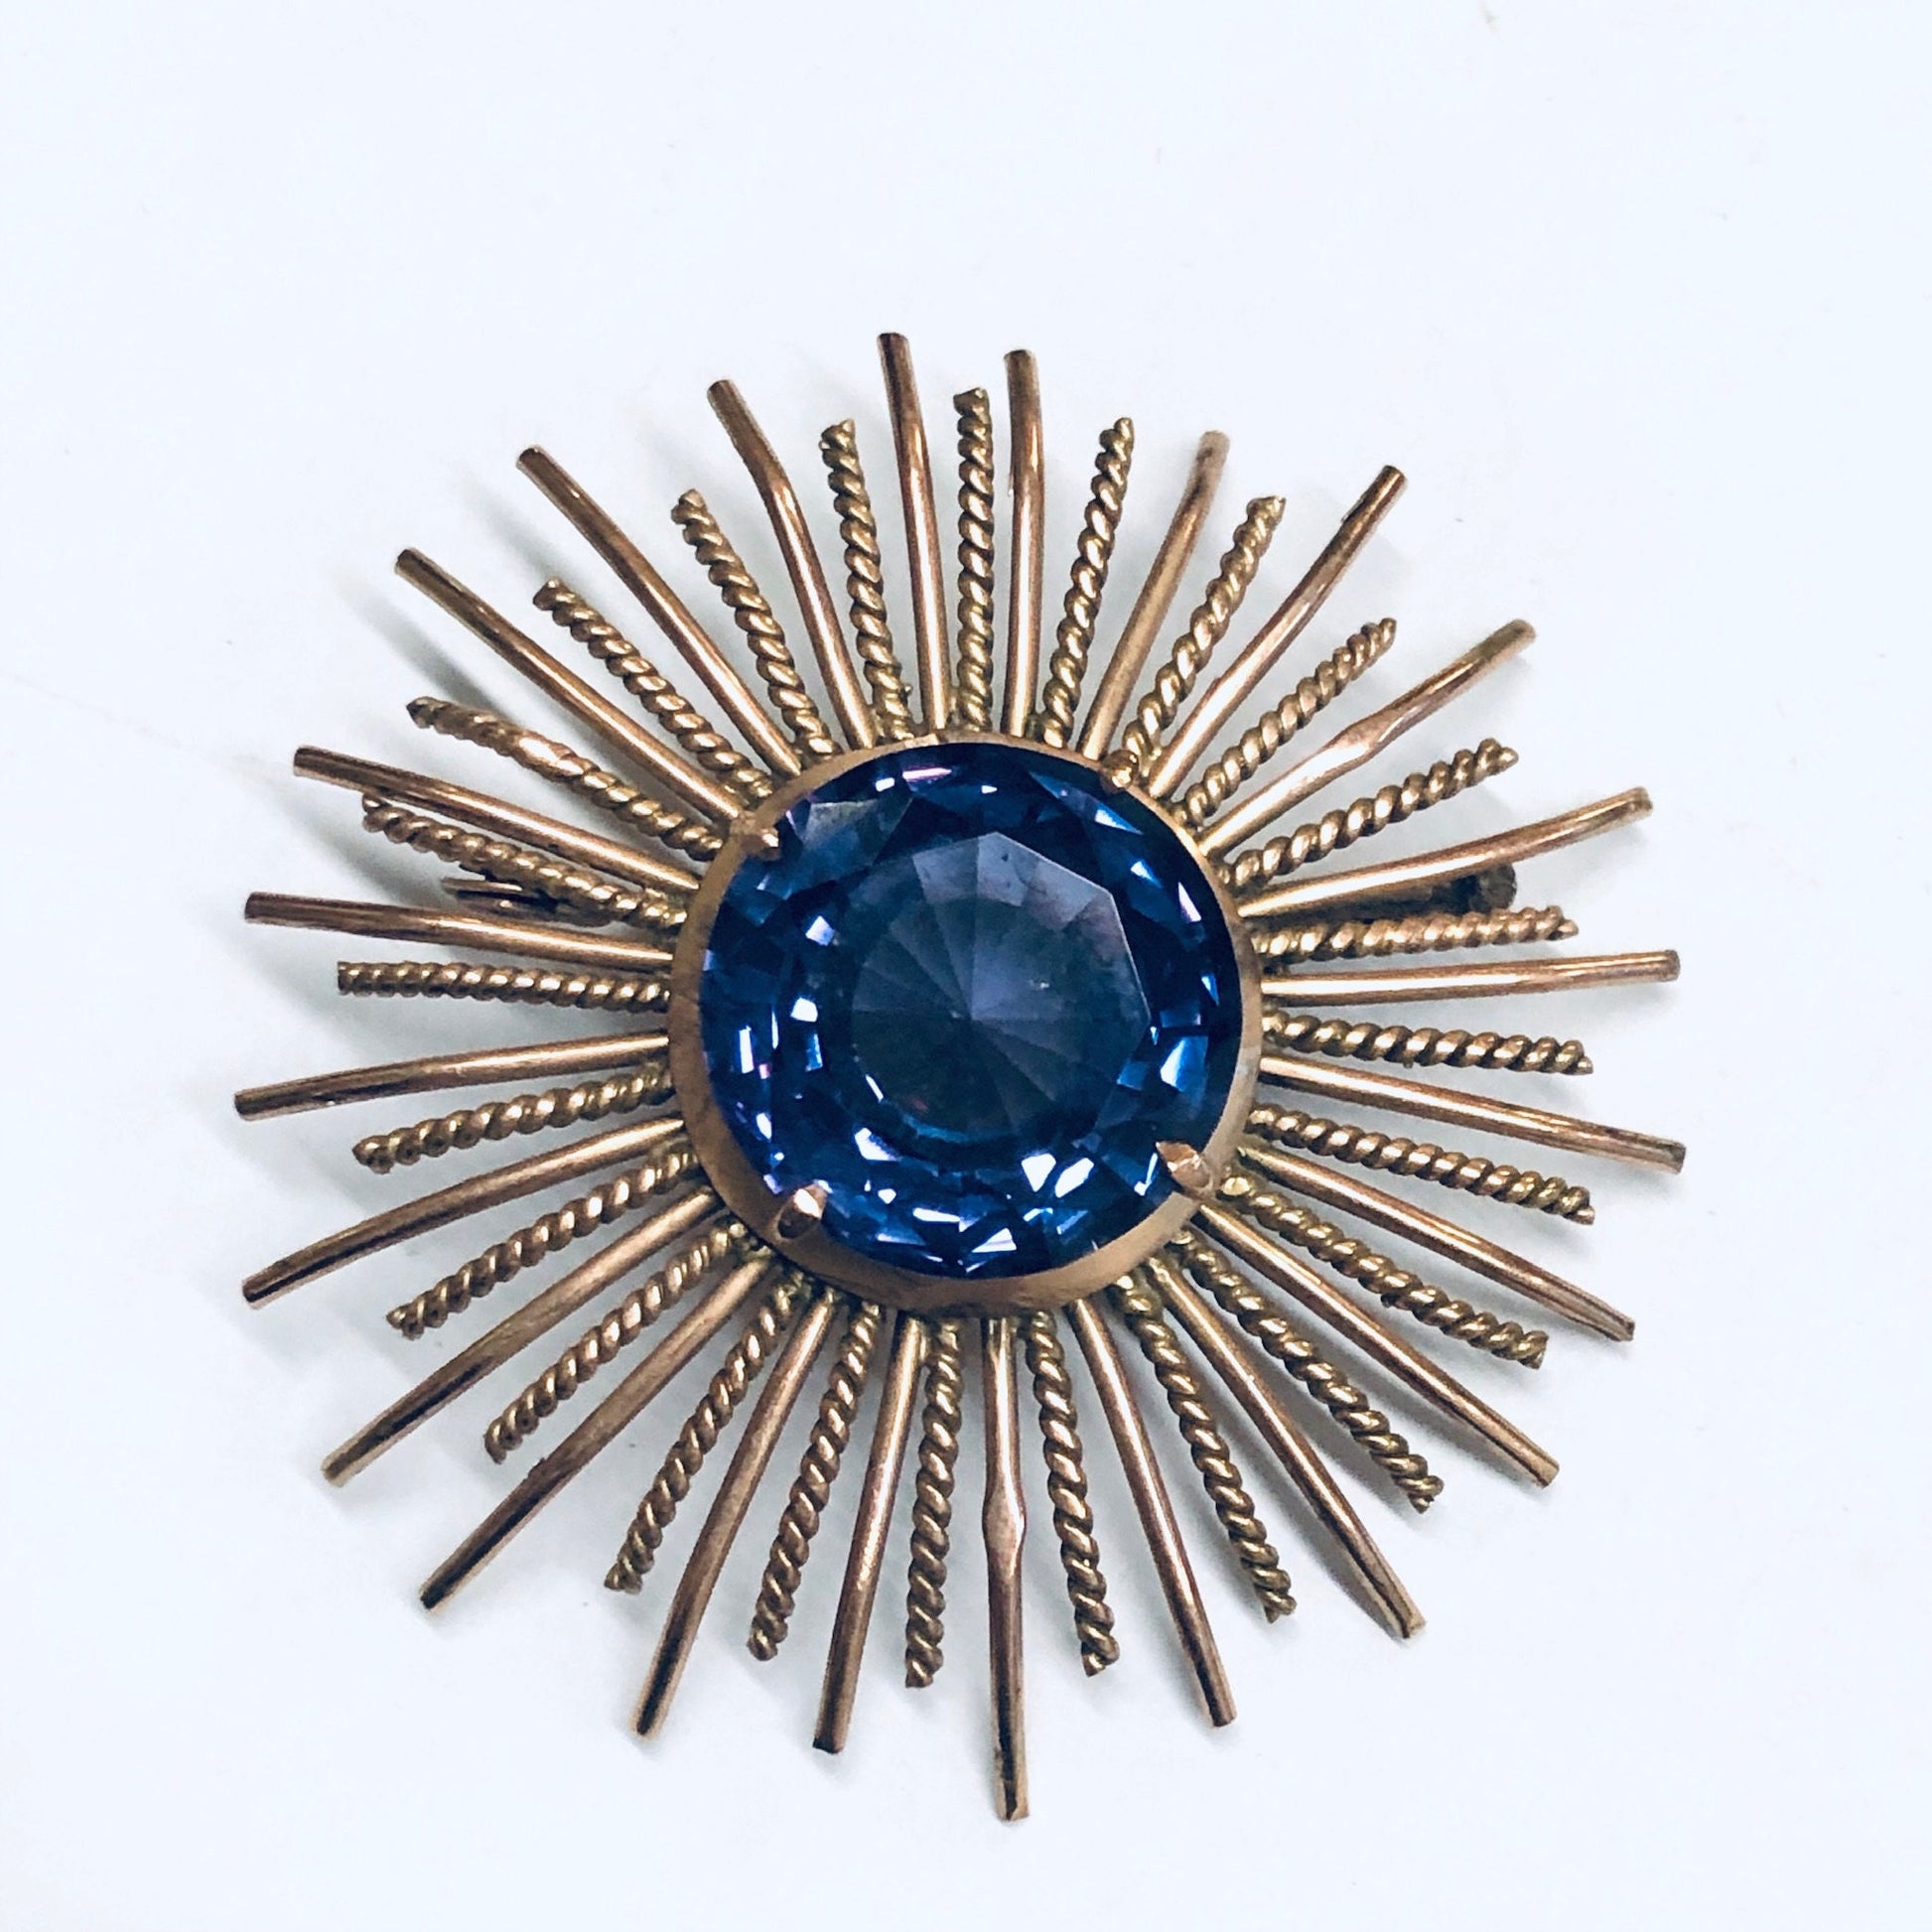 Vintage sunburst brooch with a round blue alexandrite gemstone center, surrounded by radial rose gold bars, creating an elegant purple and blue antique pin or jewelry piece.